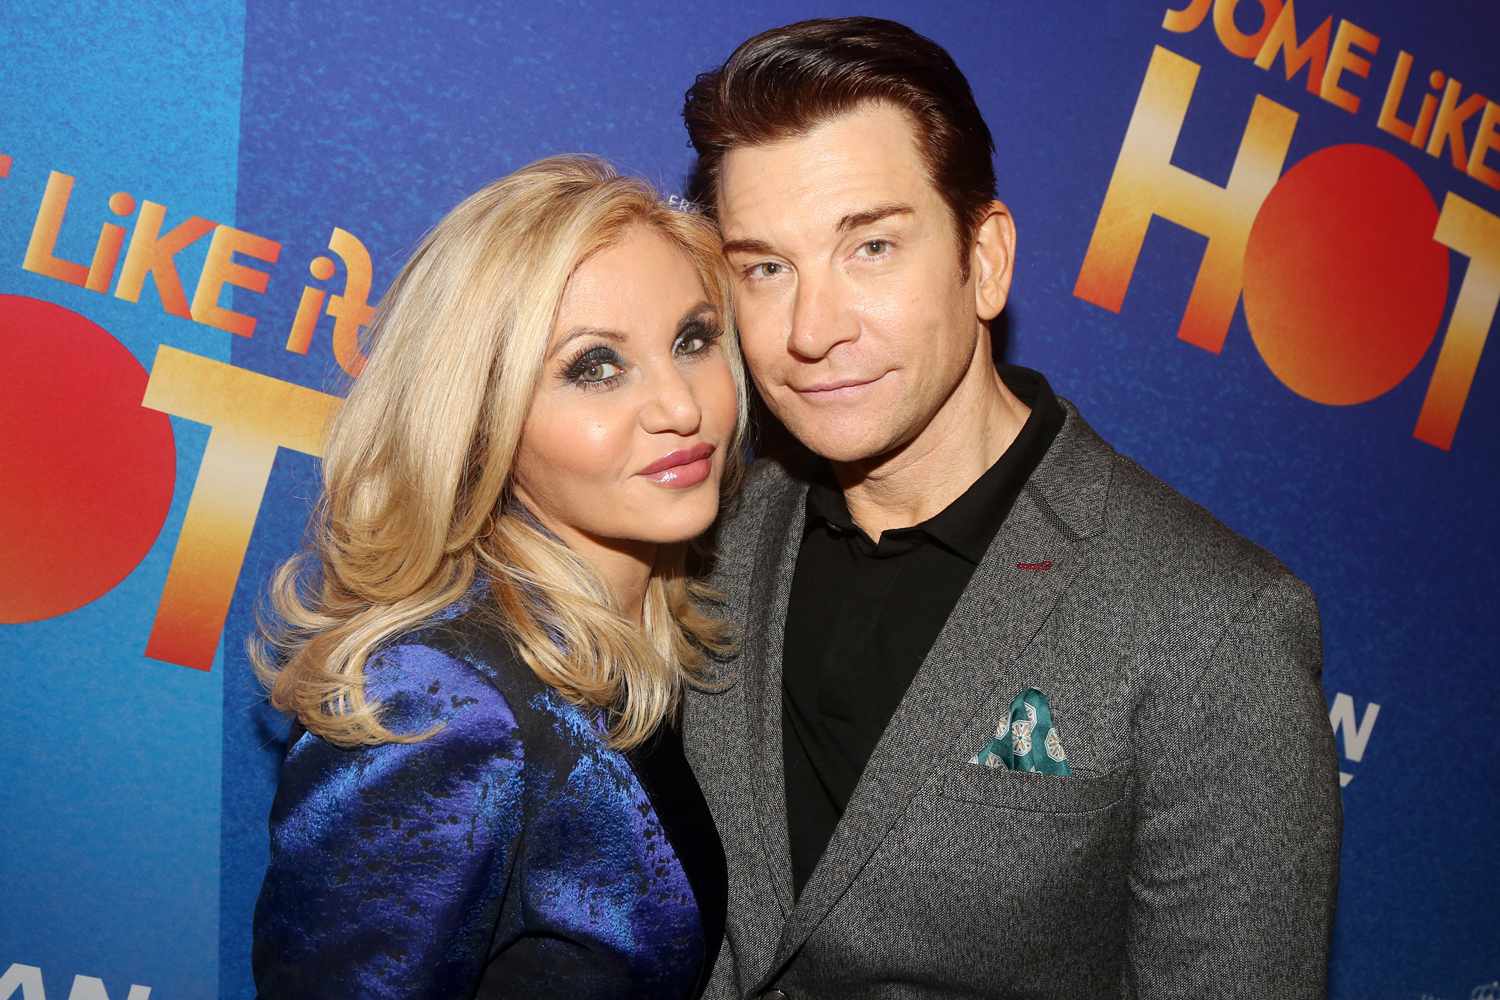 Broadway's Orfeh and Andy Karl Separating After 23 Years of Marriage